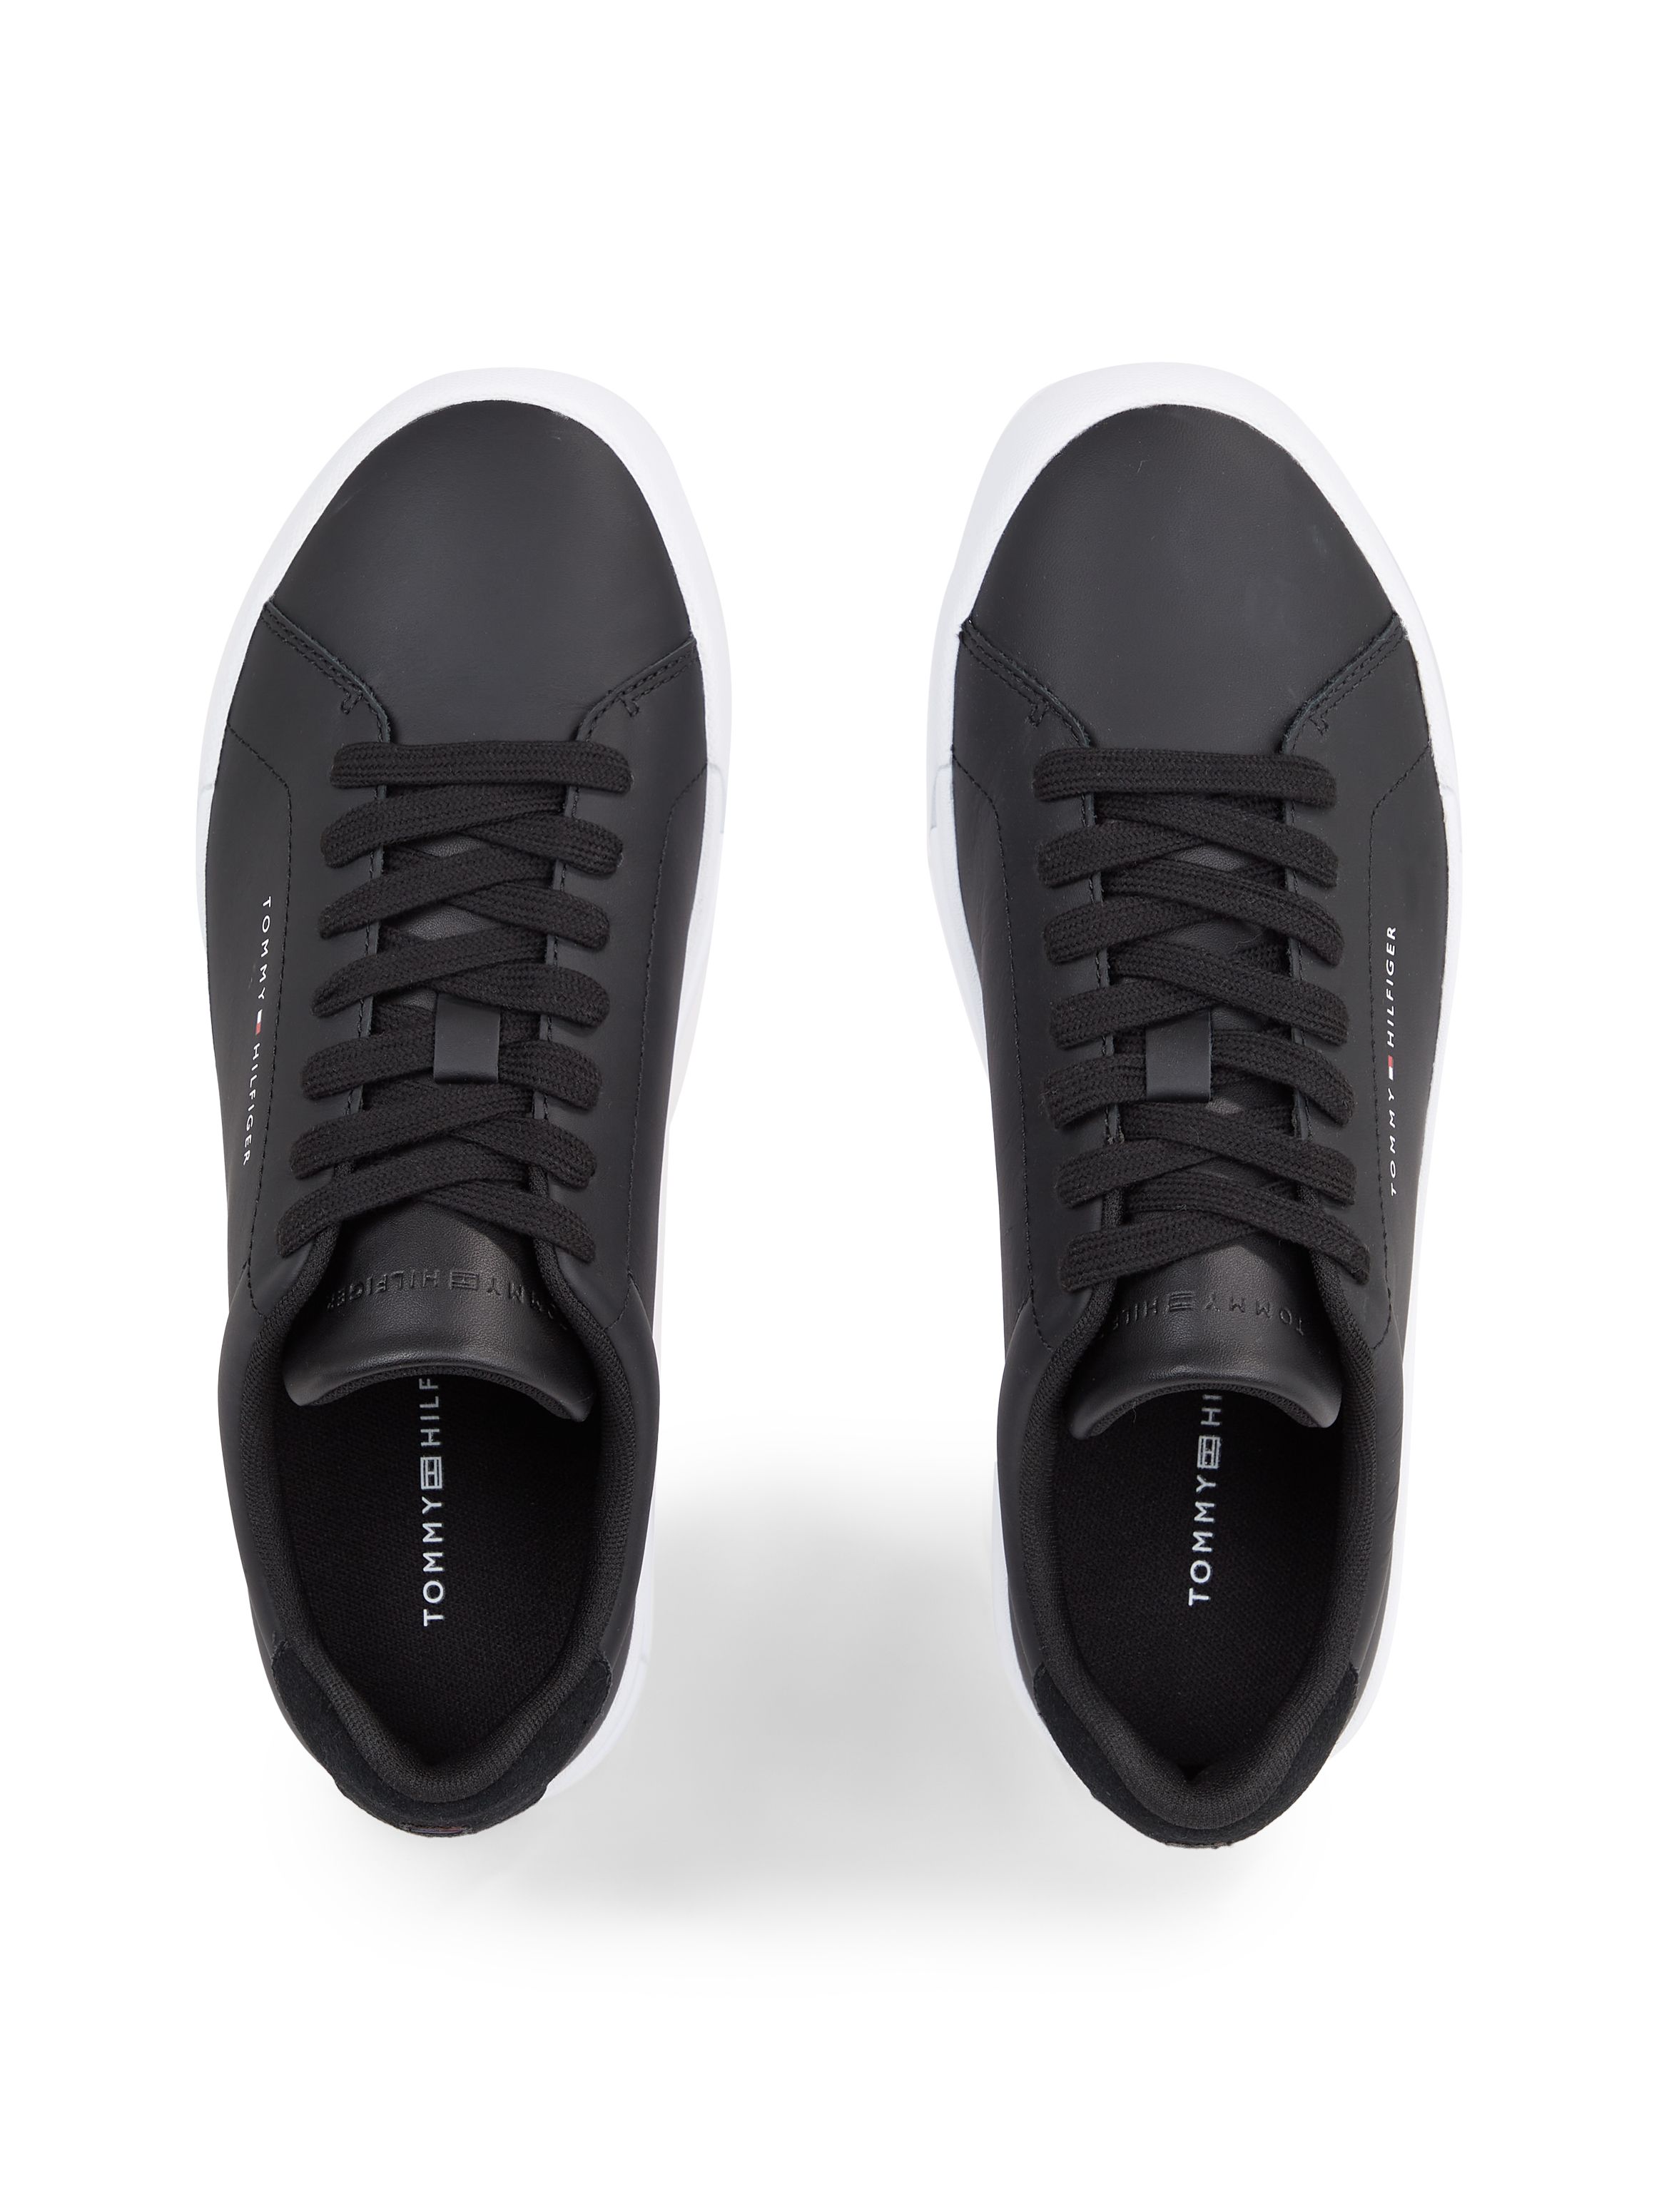 Tommy hilfiger Court Leather Sneakers